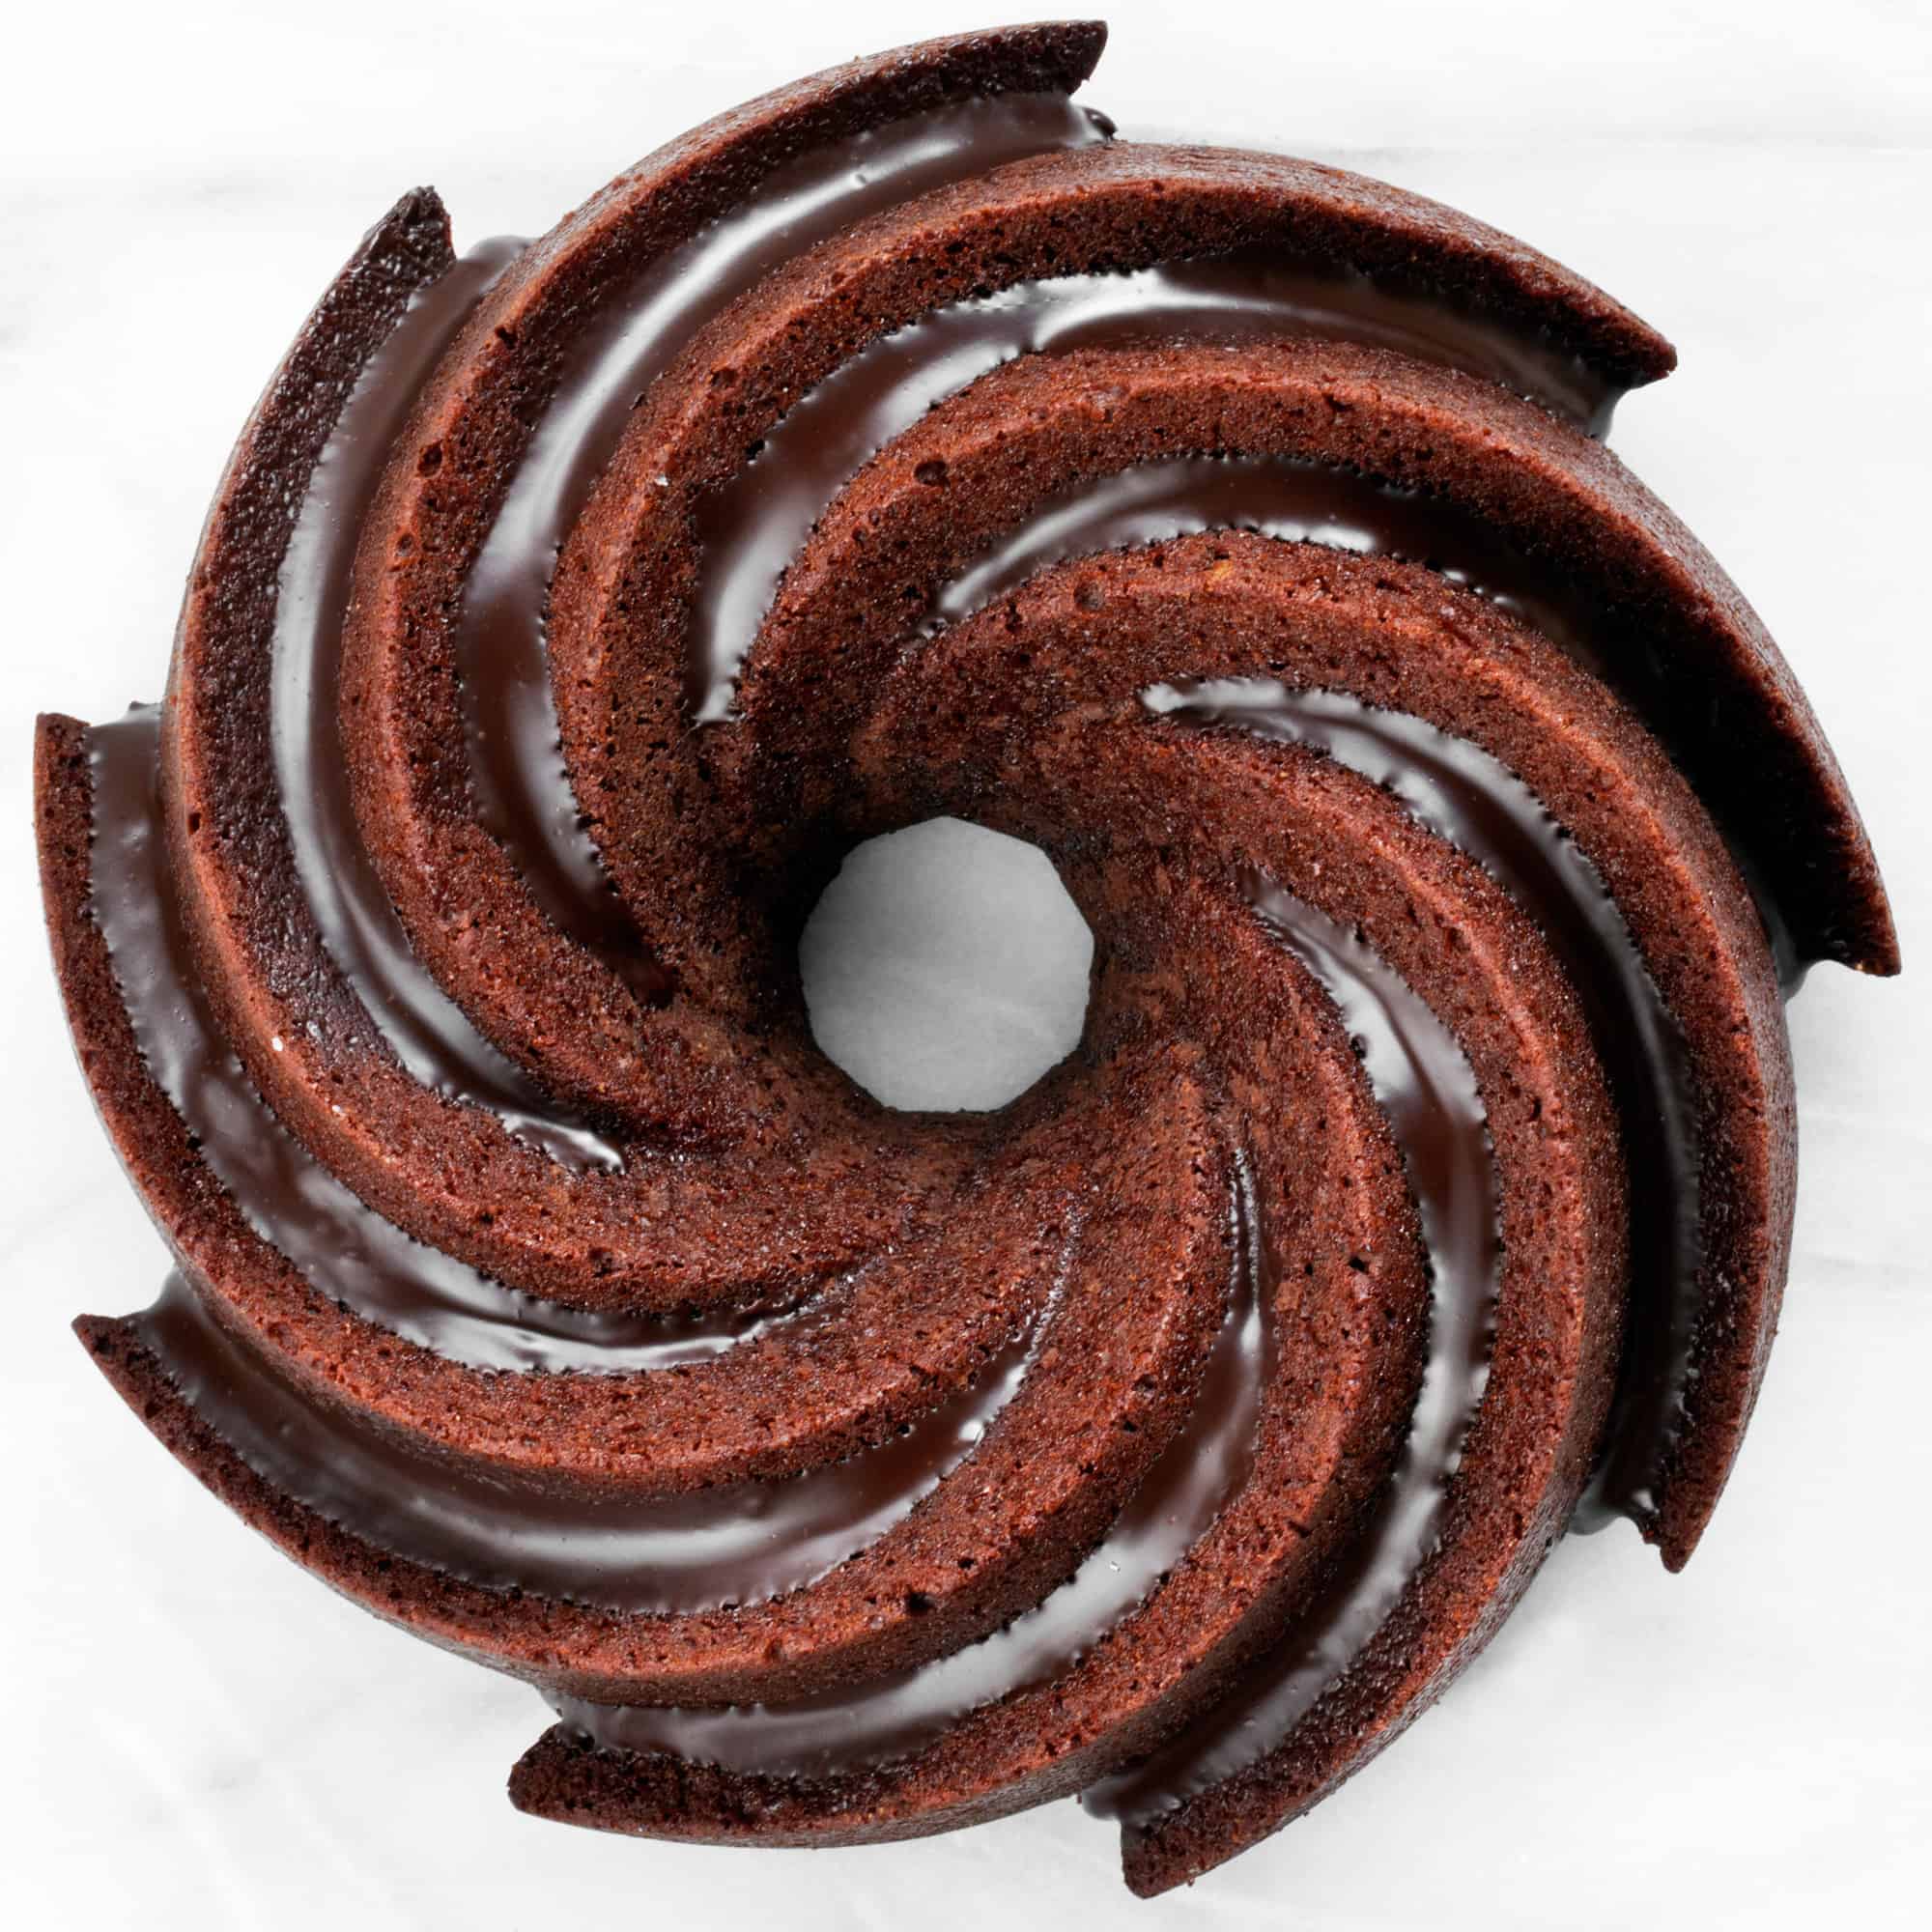 Chocolate bundt cake drizzled with chocolate.